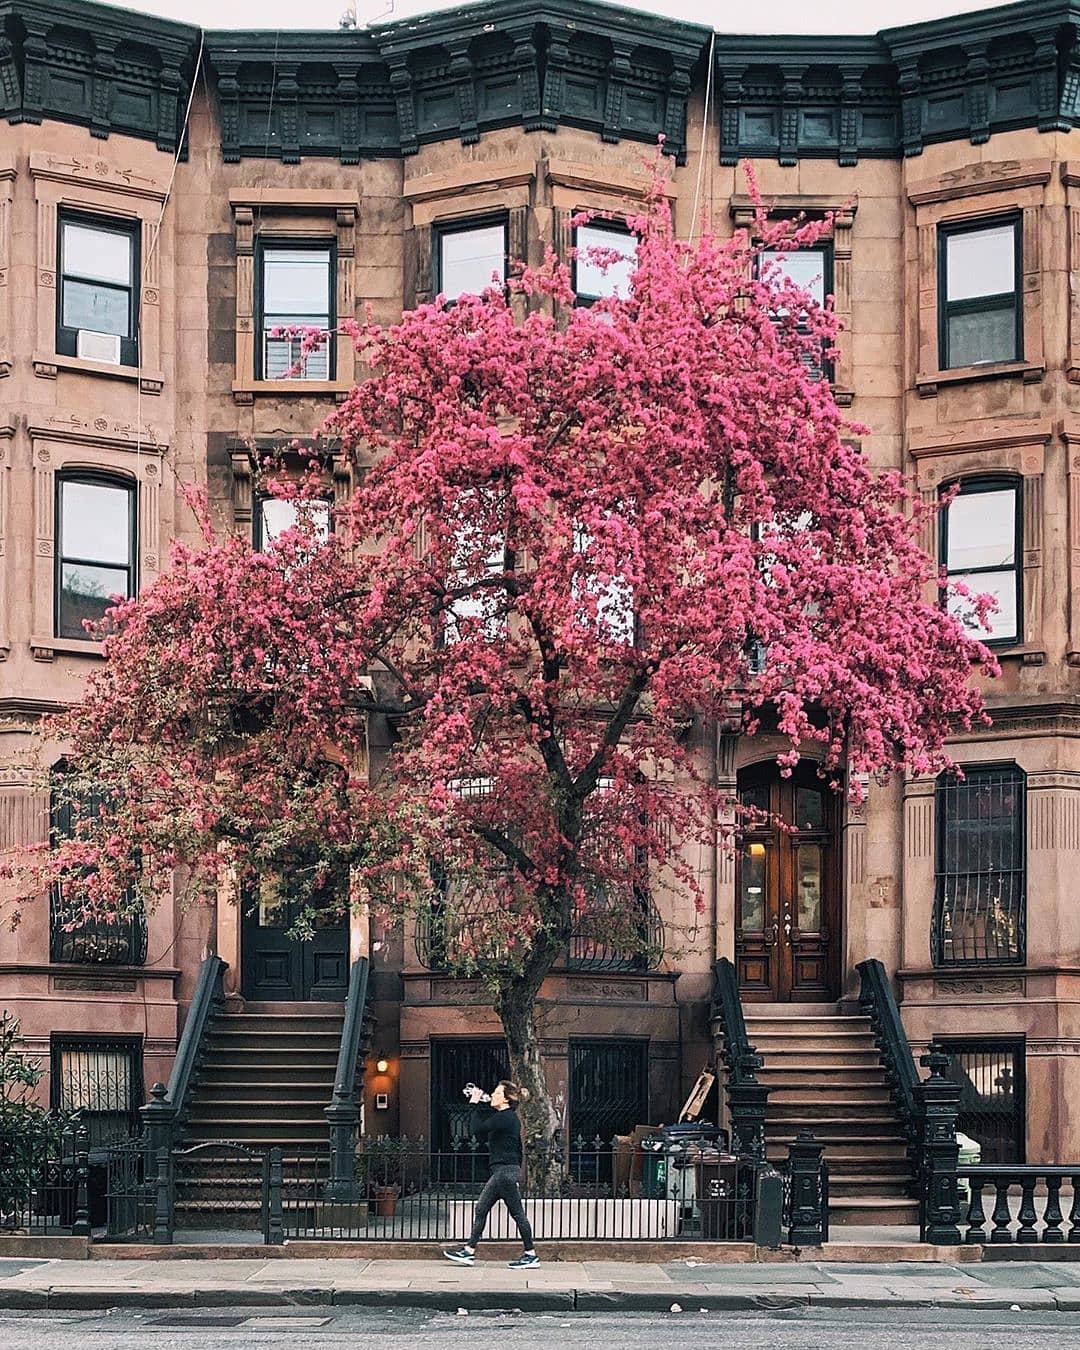 Brownstone home with red tree in front in Park Slope. Photo by Instagram user @yorkvnew